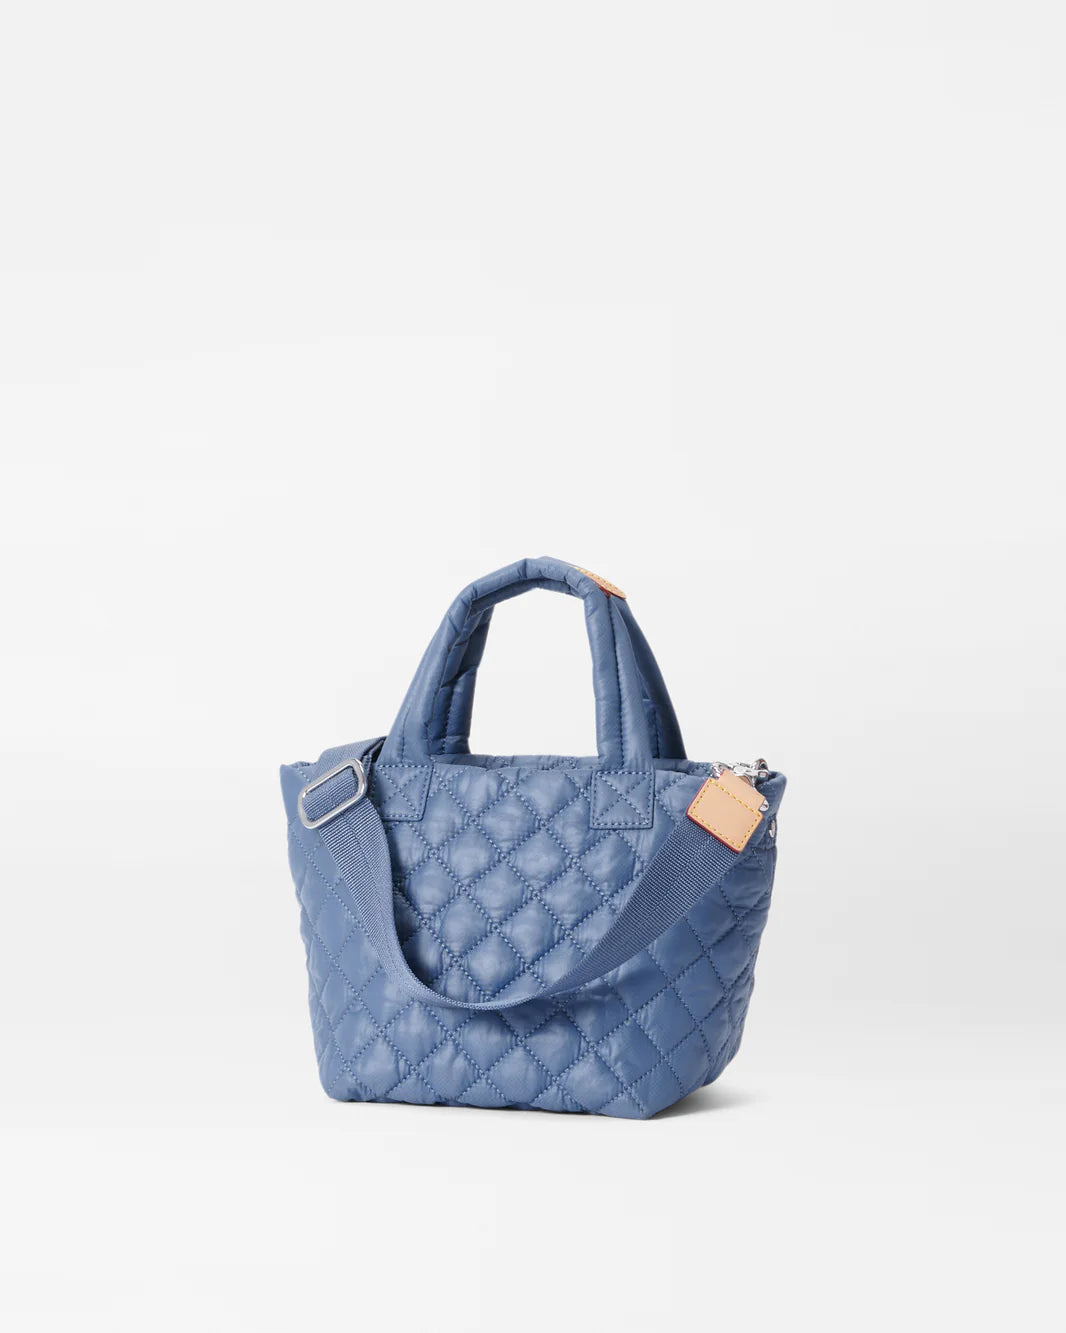 MZ WALLACE MICRO METRO TOTE DELUXE IN DENIM REC – A Step Above Shoes